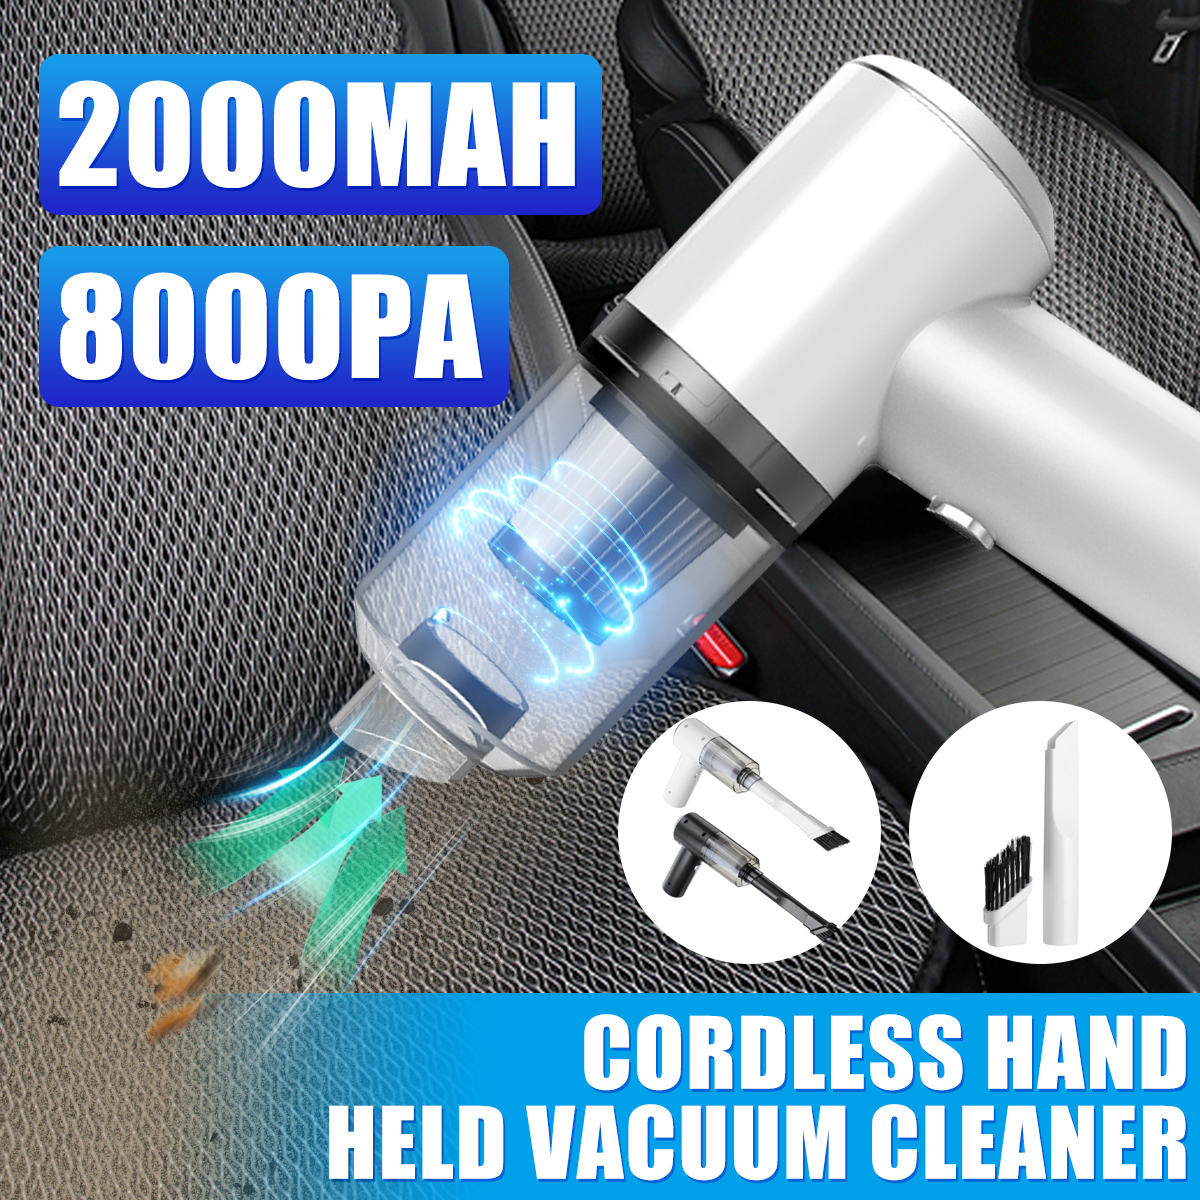 120W-Cordless-HandHeld-Vacuum-Cleaner-Mini-Portable-Dust-Cleaner-for-Car-Office-Home-8000Pa-1830652-1